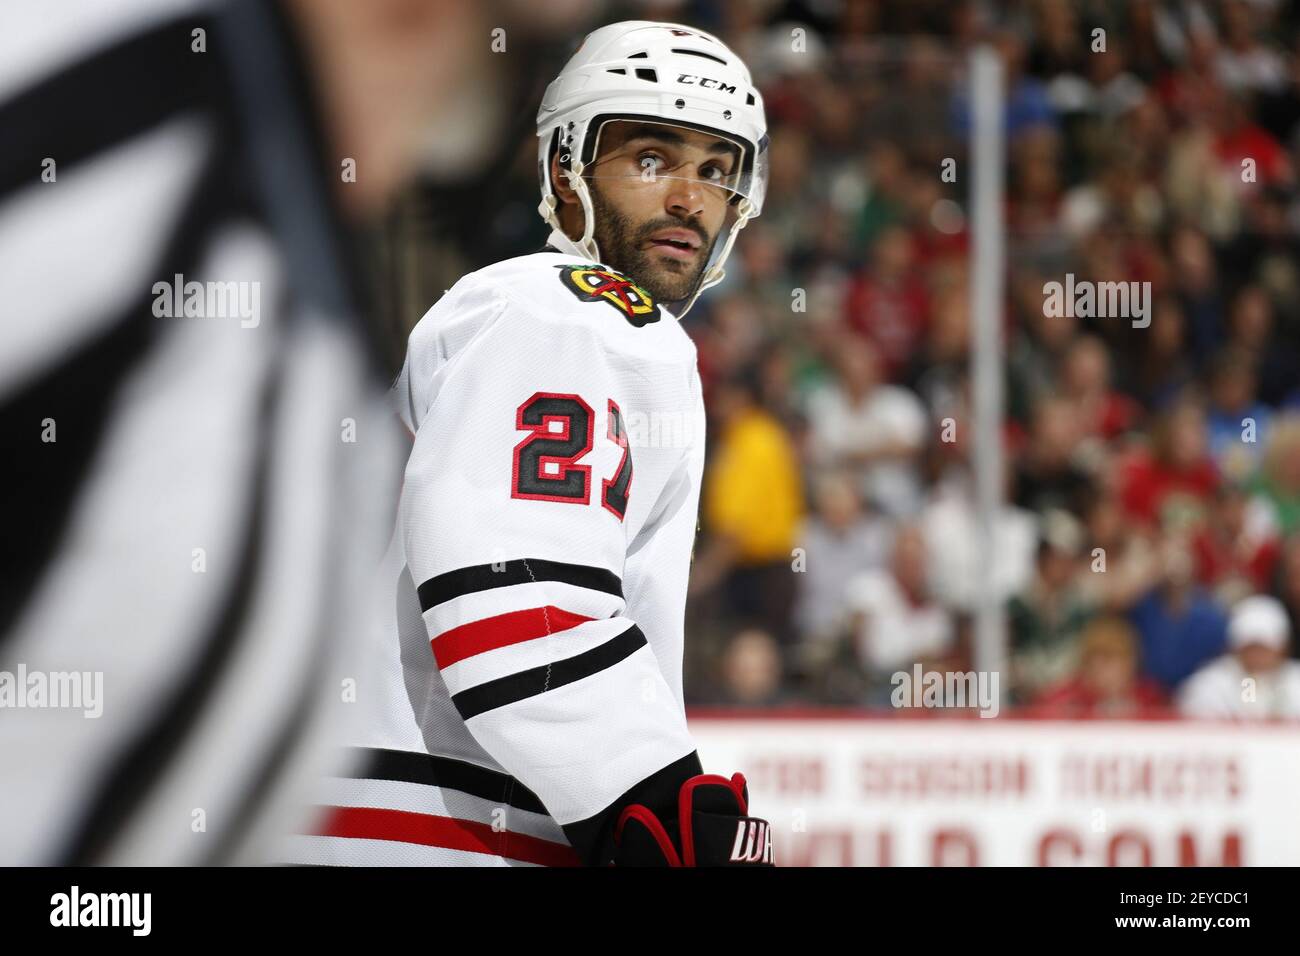 Photos from Tuesday's meeting between the Blackhawks and the Stars